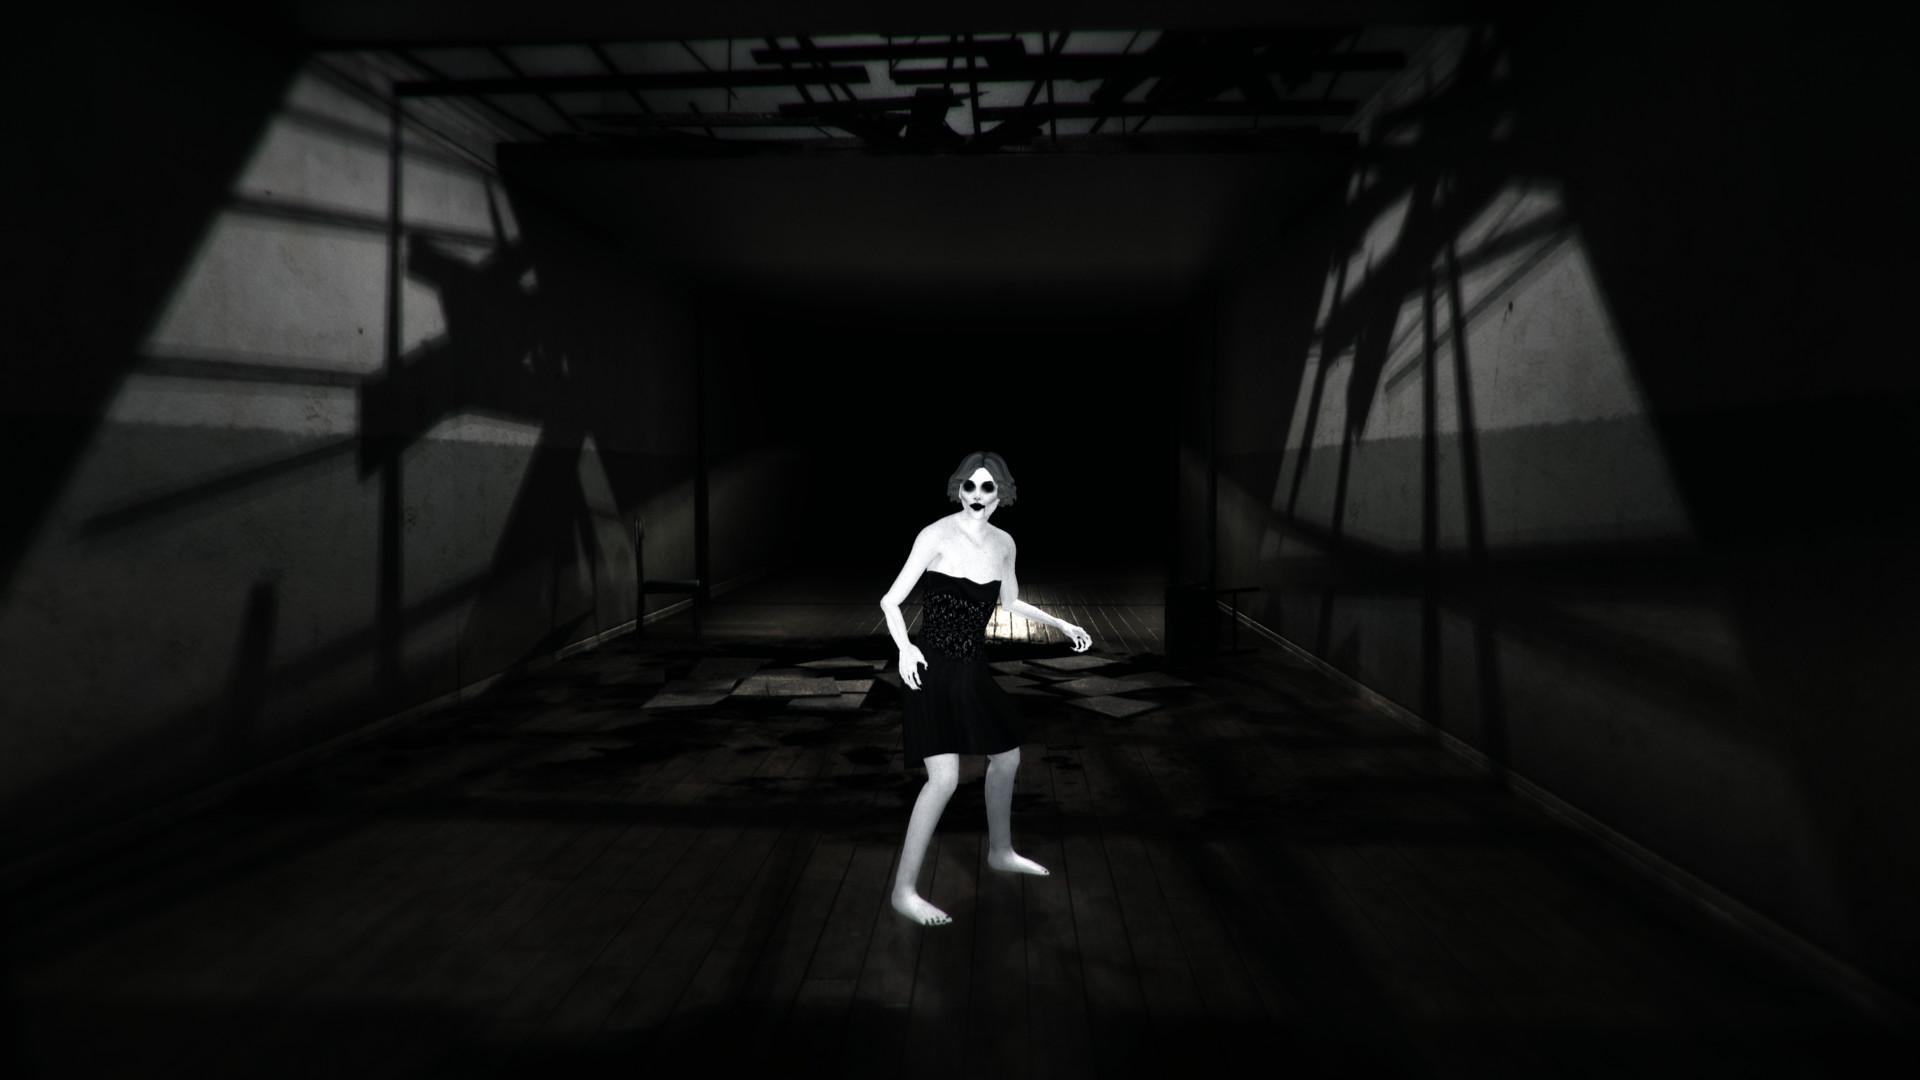 Screenshot №2 from game Insane Decay of Mind: The Labyrinth